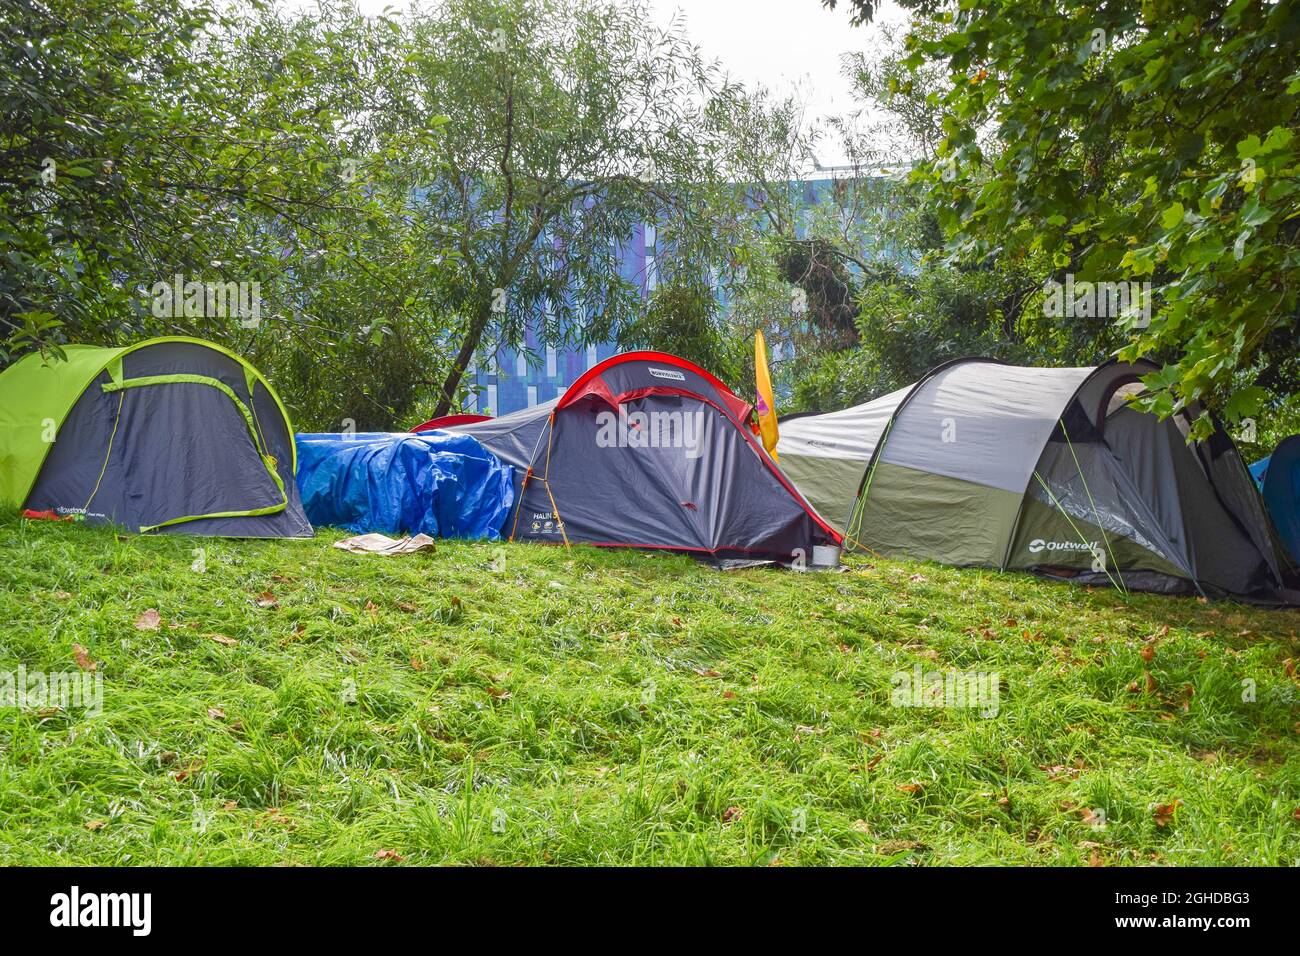 London, UK. 06th Sep, 2021. Tents are seen during the DSEI protest outside  ExCeL London.Protesters have set up a camping site outside the ExCeL Centre  in East London, with plans to disrupt